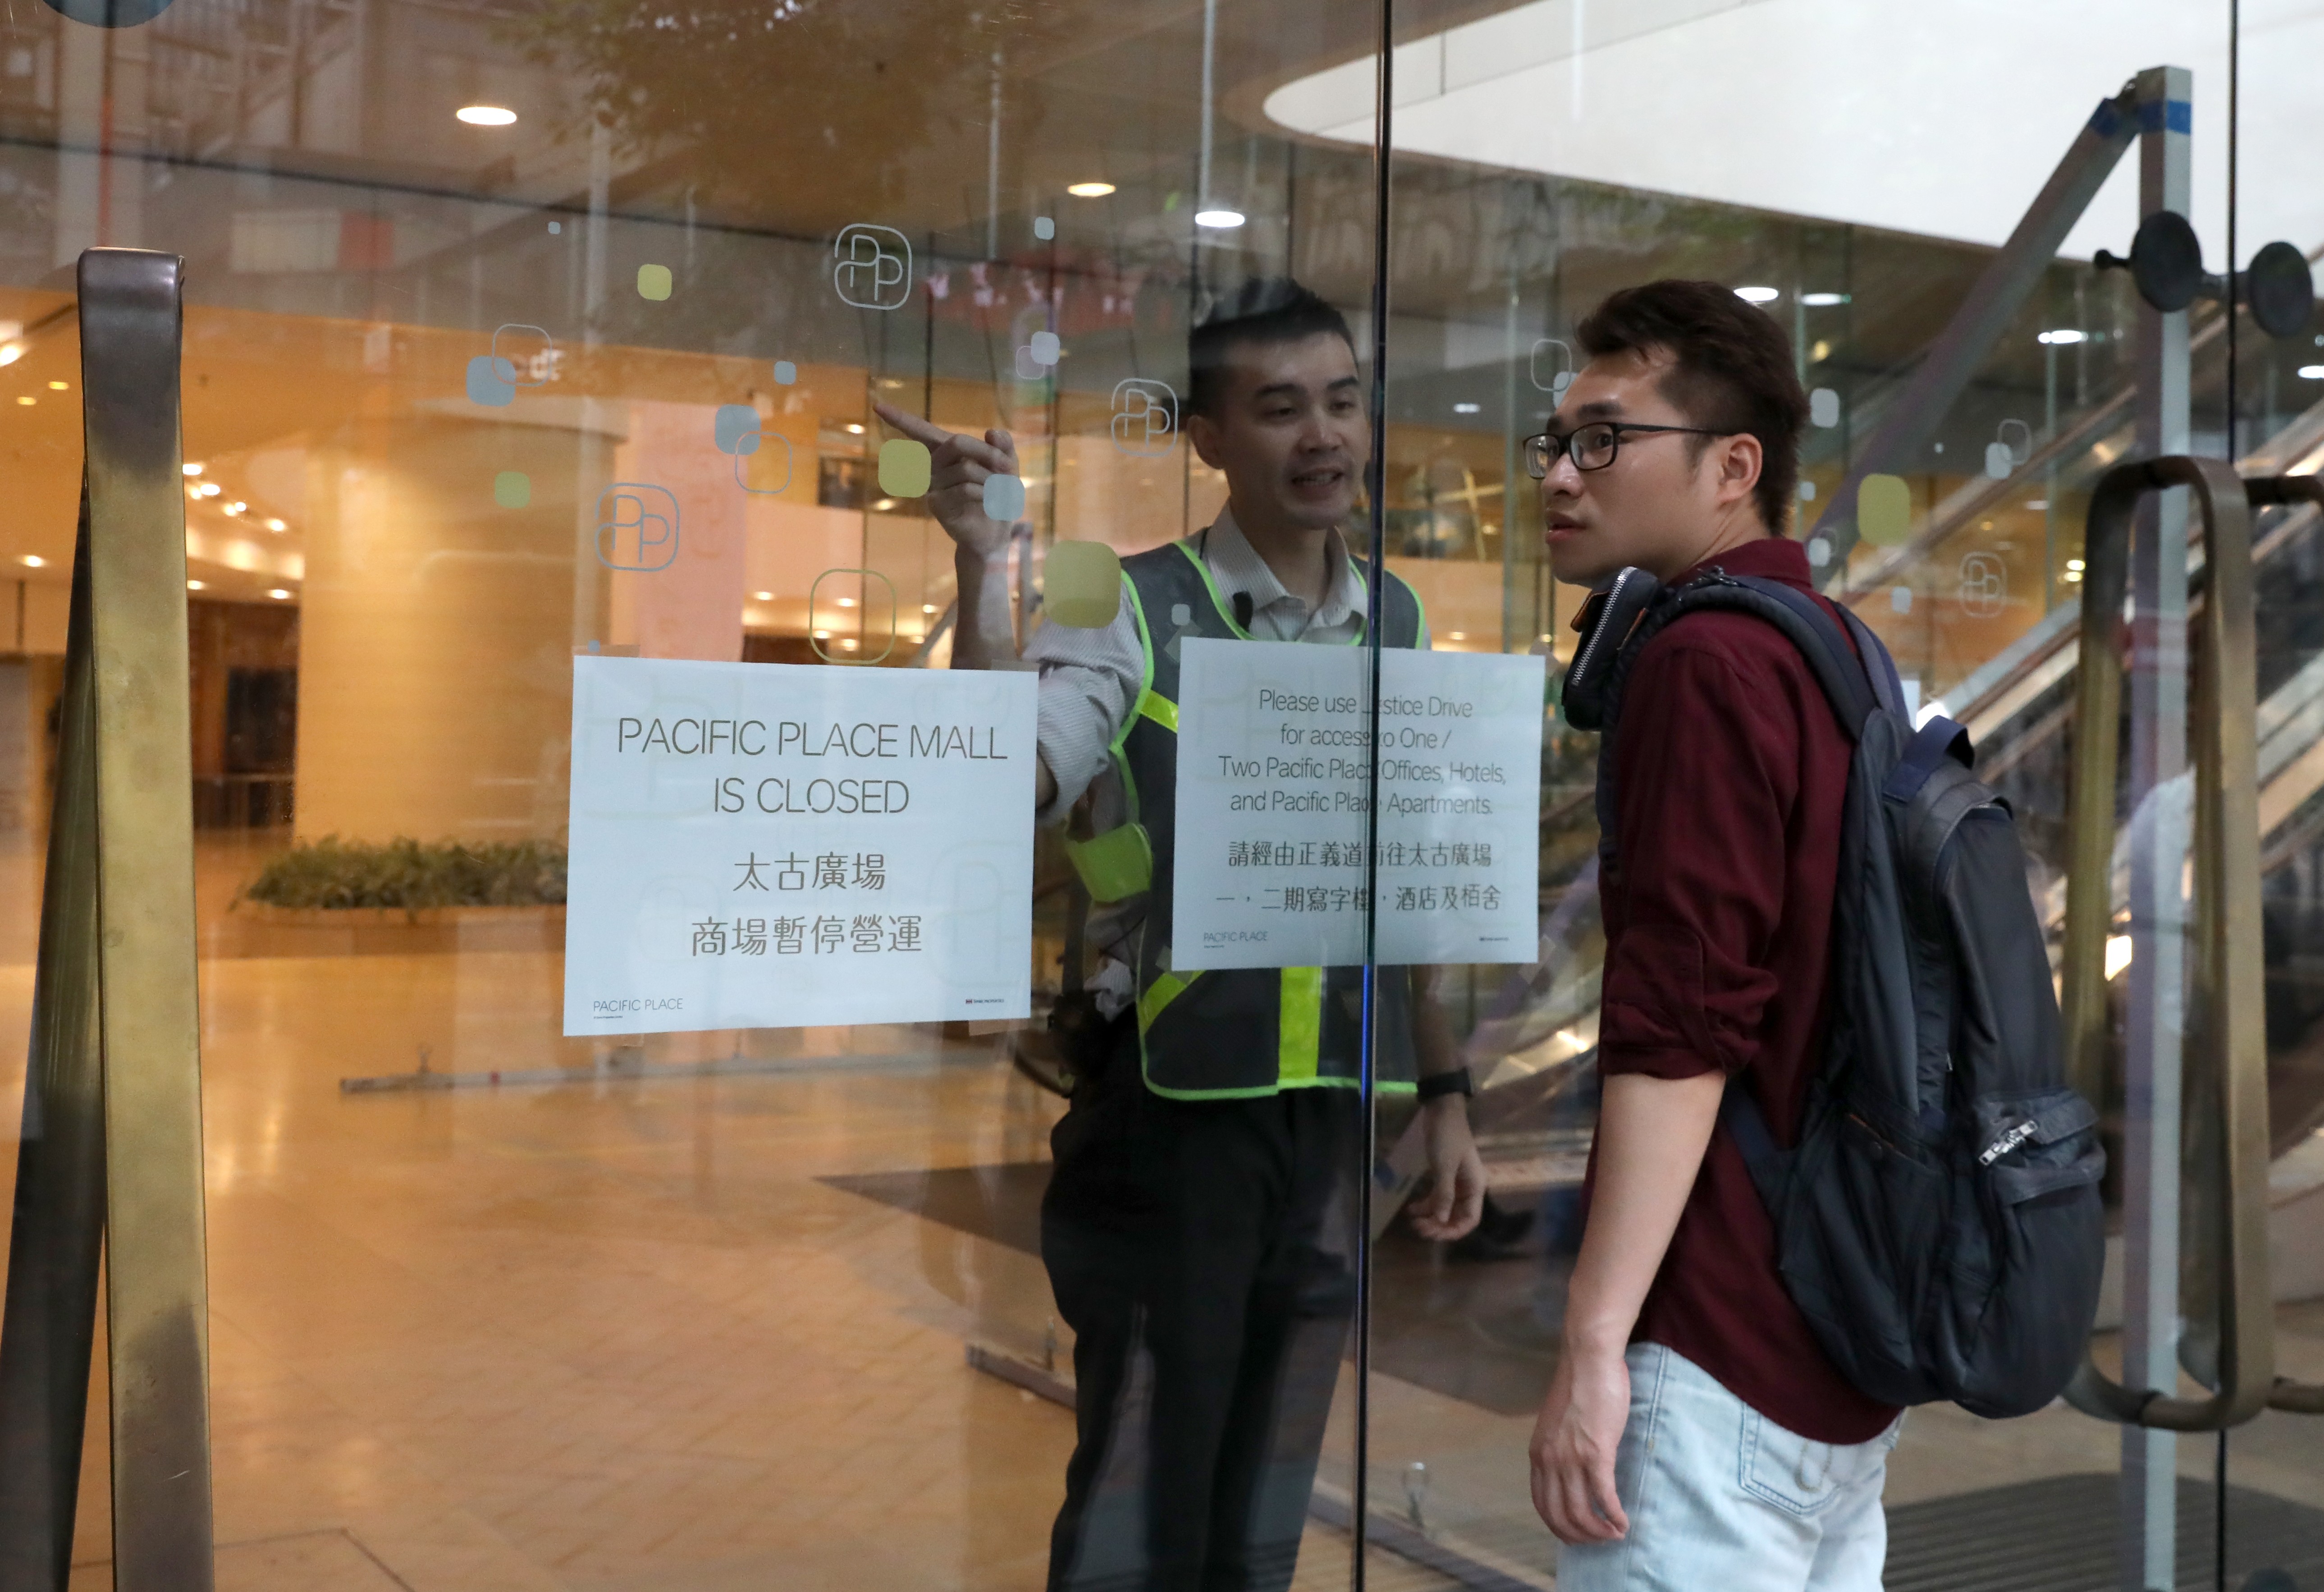 Pacific Place was closed to shoppers on Thursday morning, but its hotels and two office towers continued to operate. Photo: K.Y. Cheng